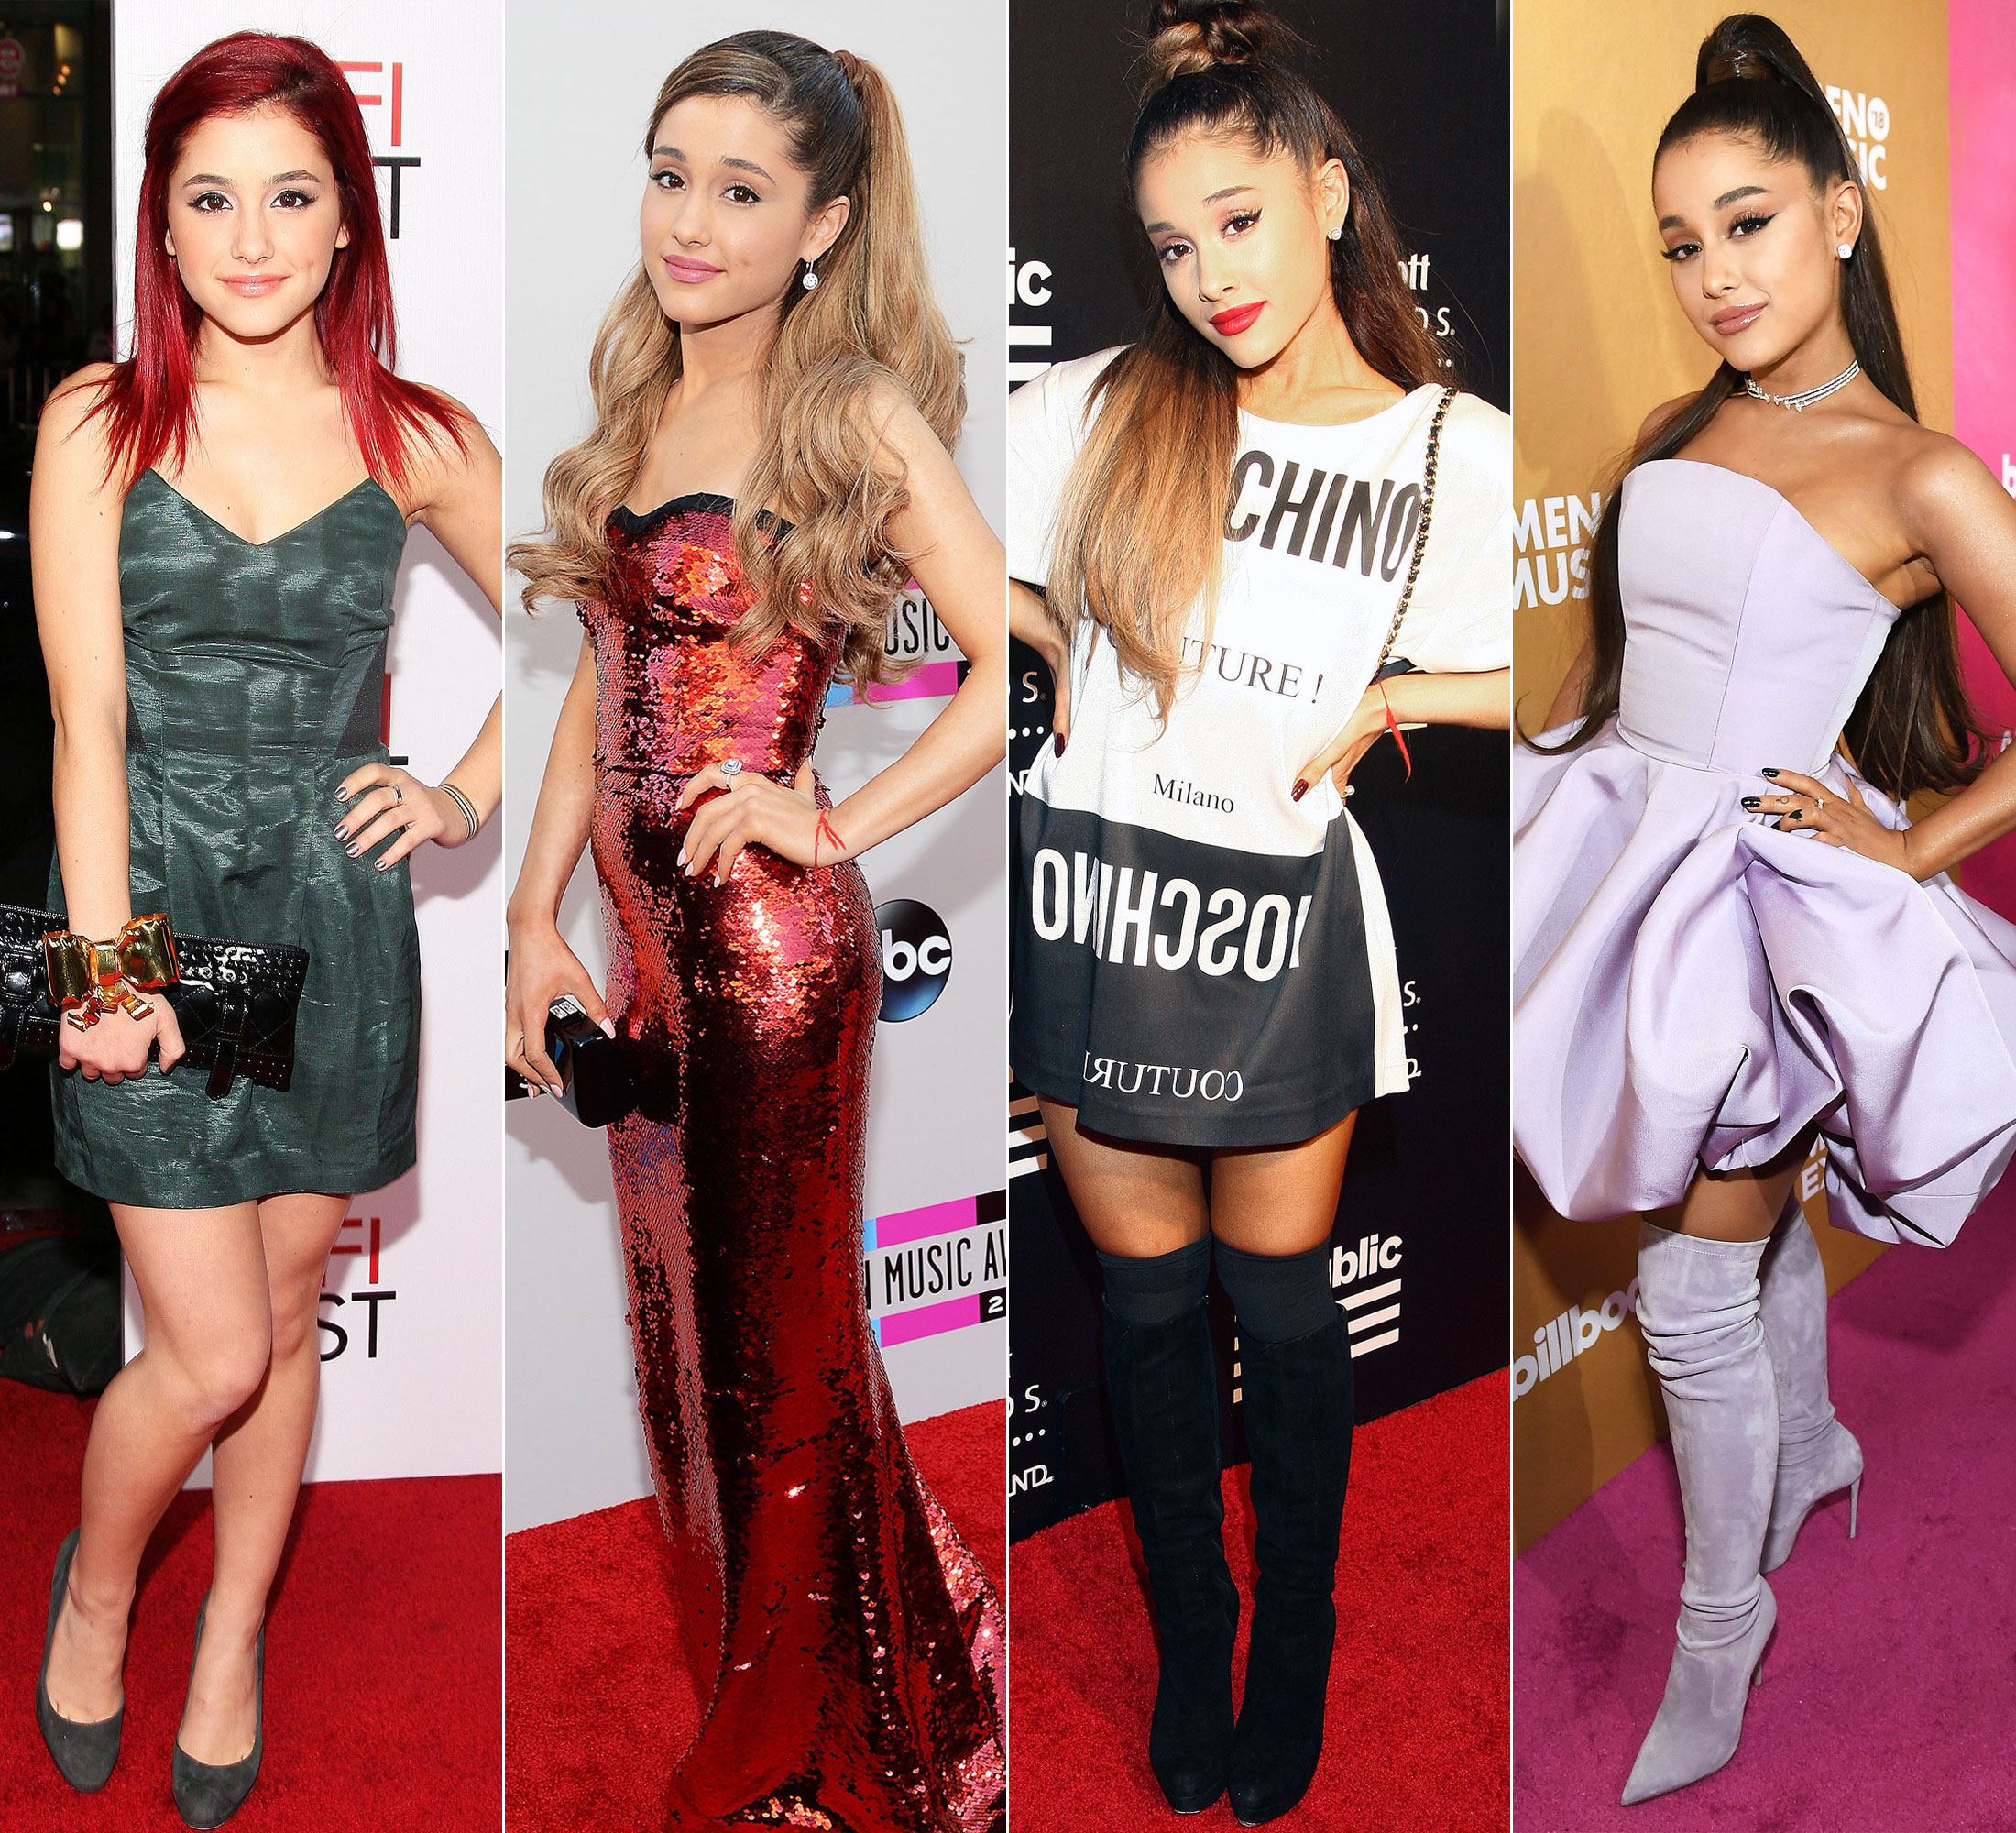 Ariana Grande Porn Taylor Swift Nude - Ariana Grande's Style Evolution: Red Carpet and Beyond